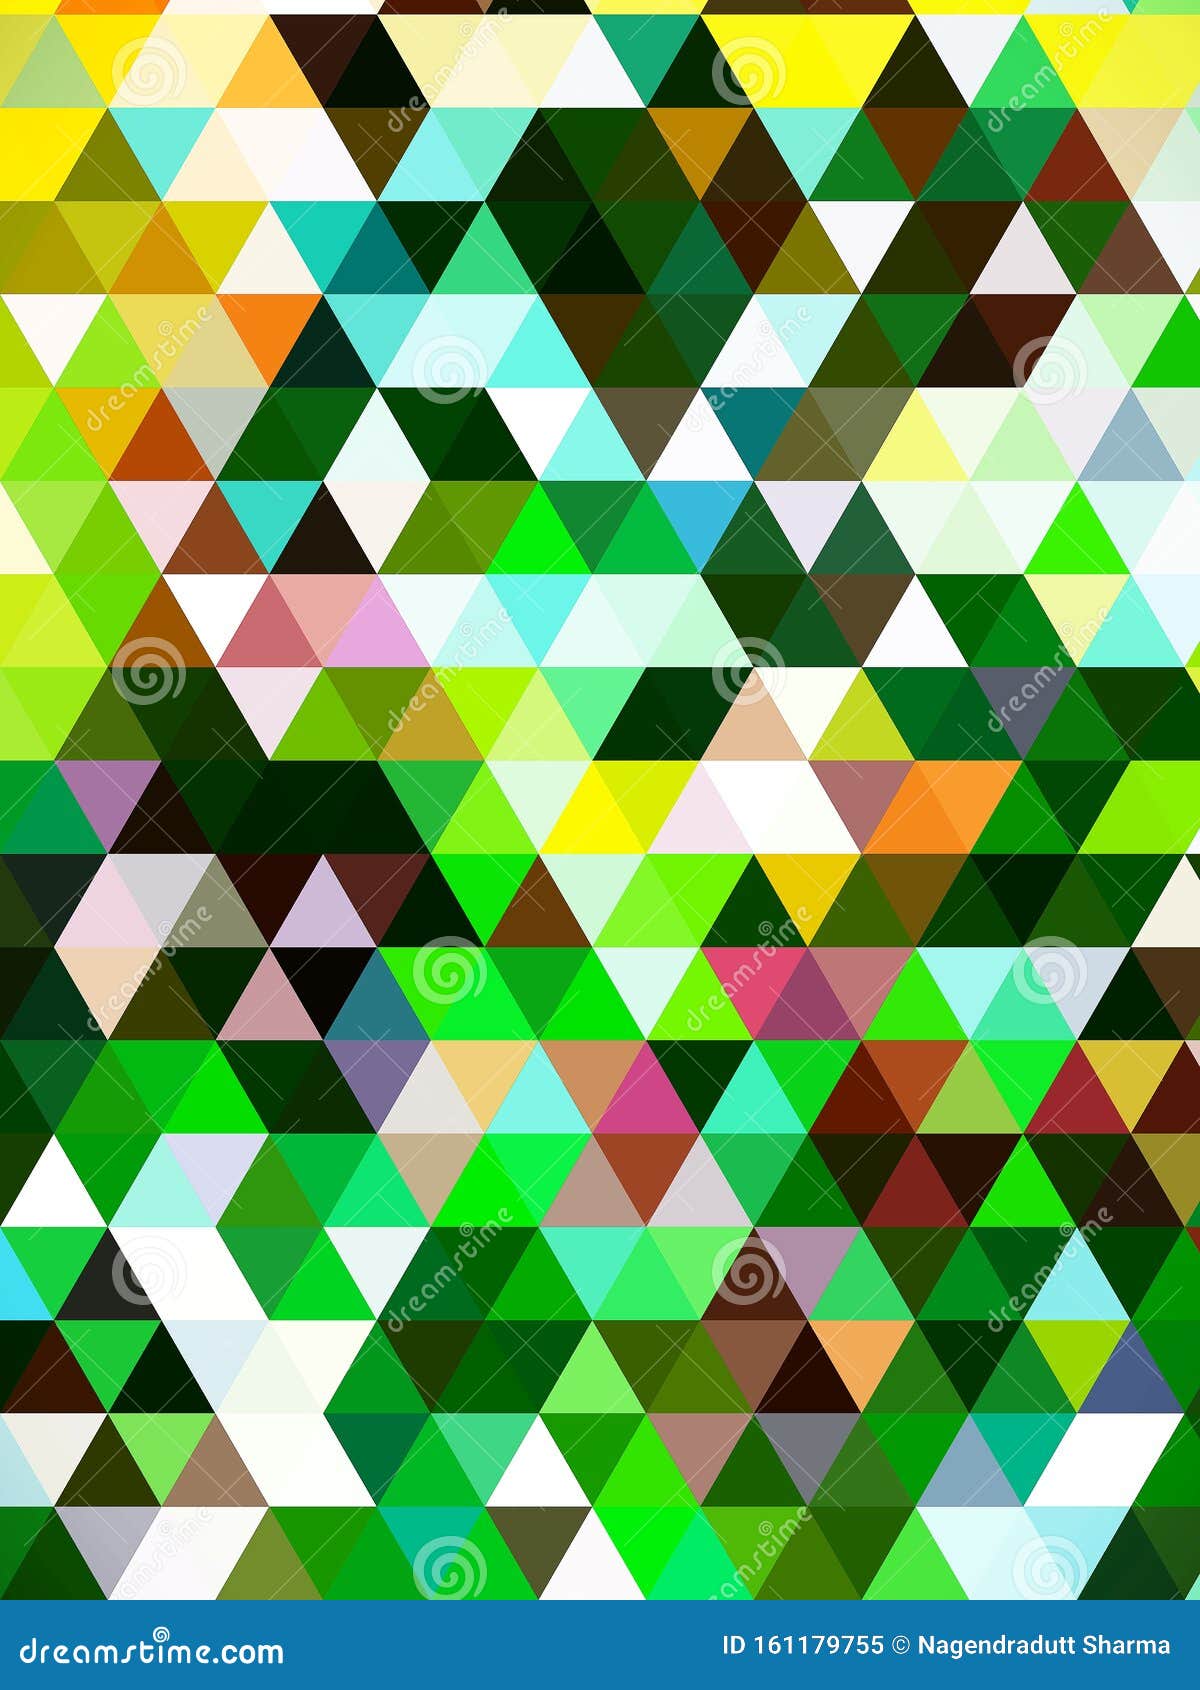 a distinguishing fetching digital colorful pattern of squares